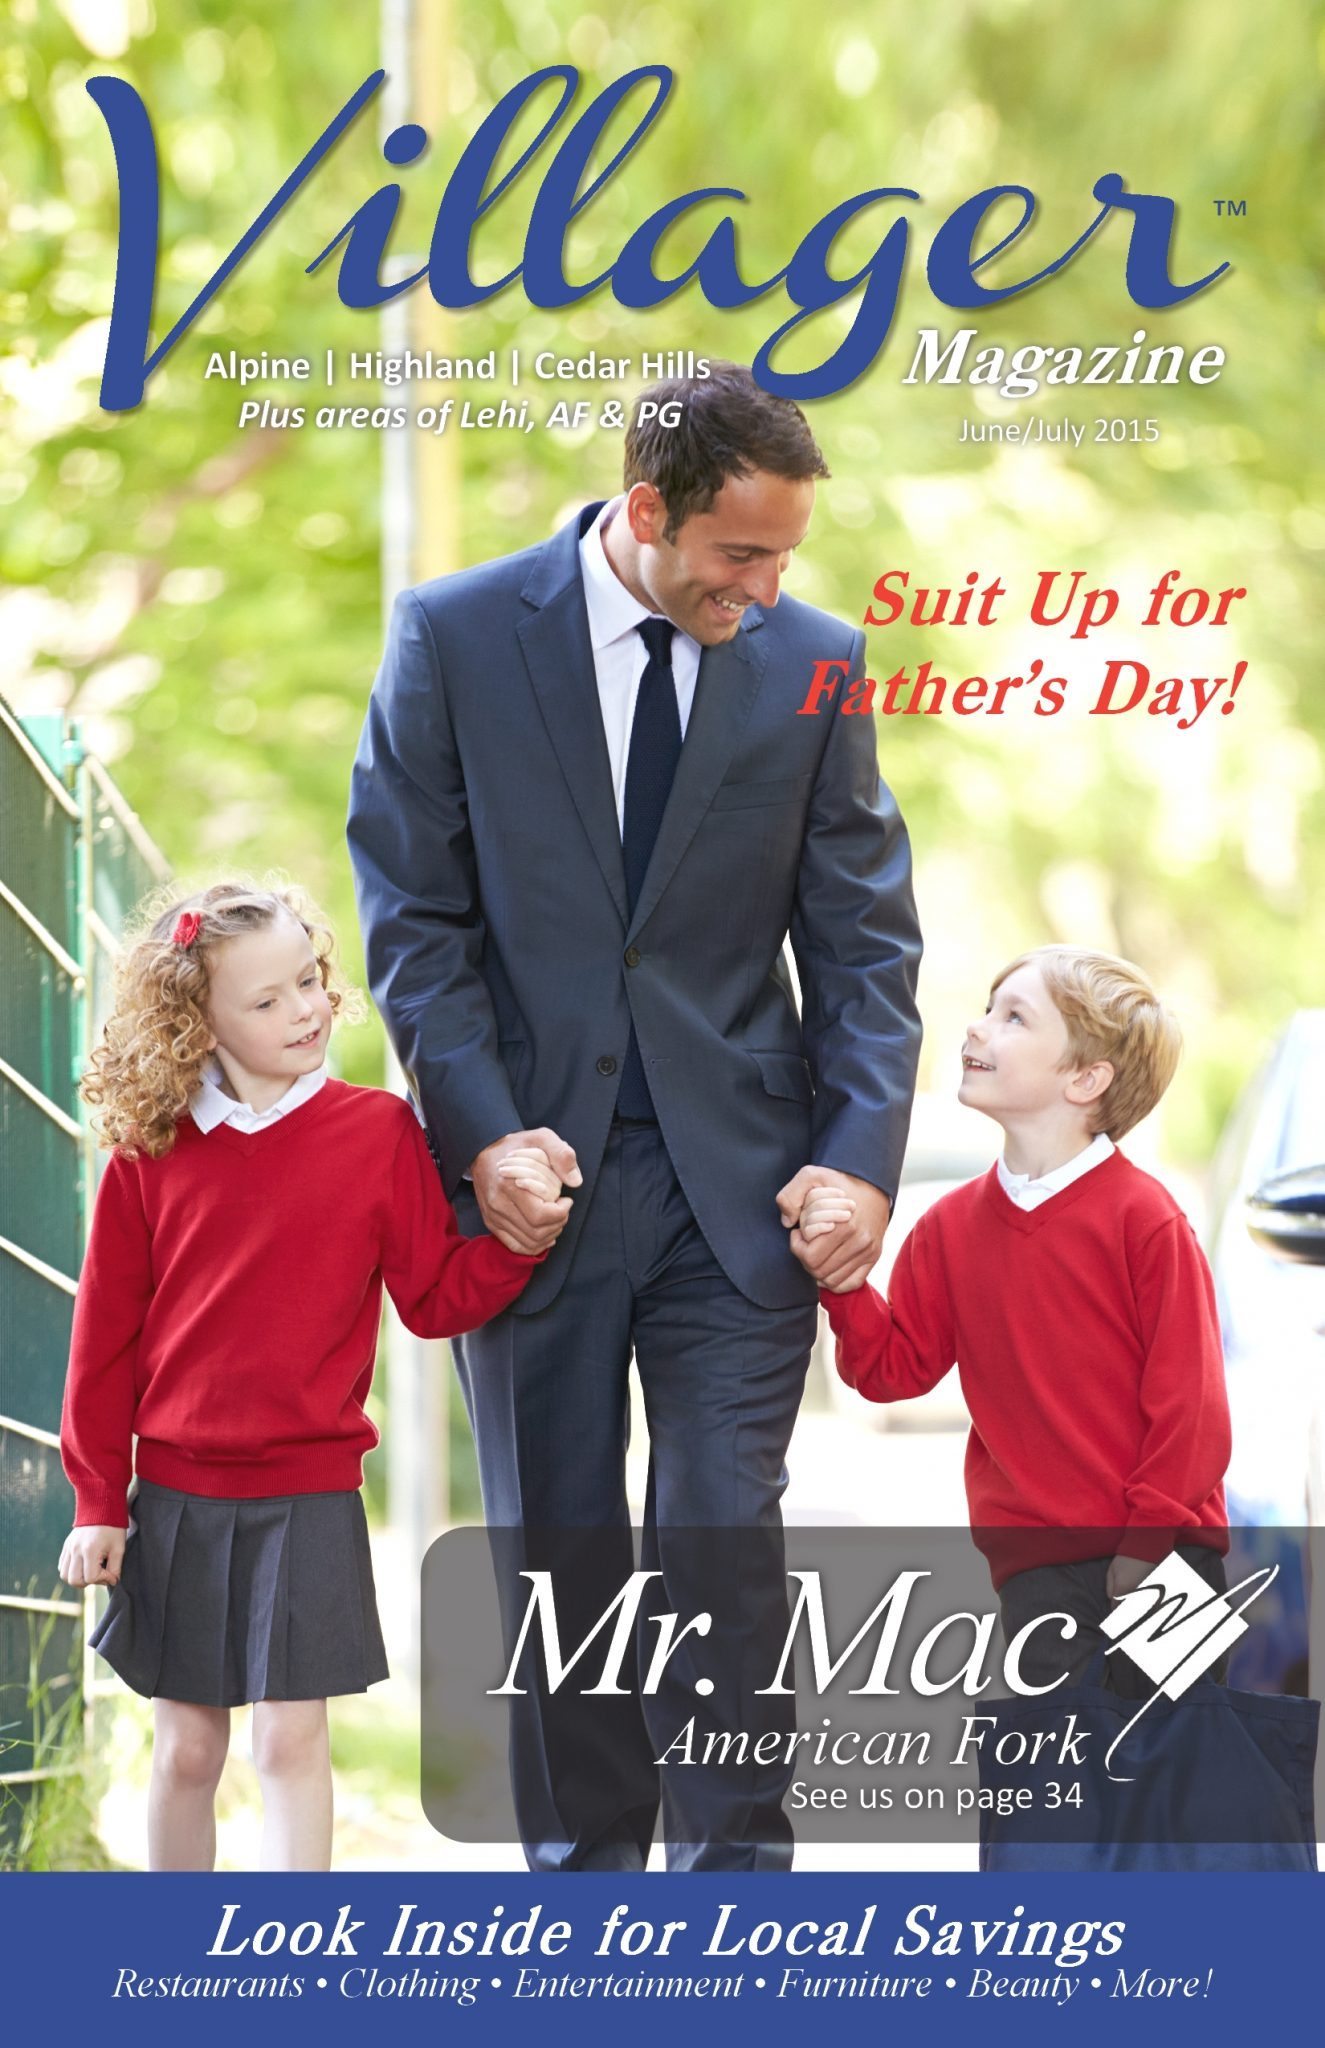 Image of a Villager Magazine cover with a father wearing a suit from Mr. Mac and two children.